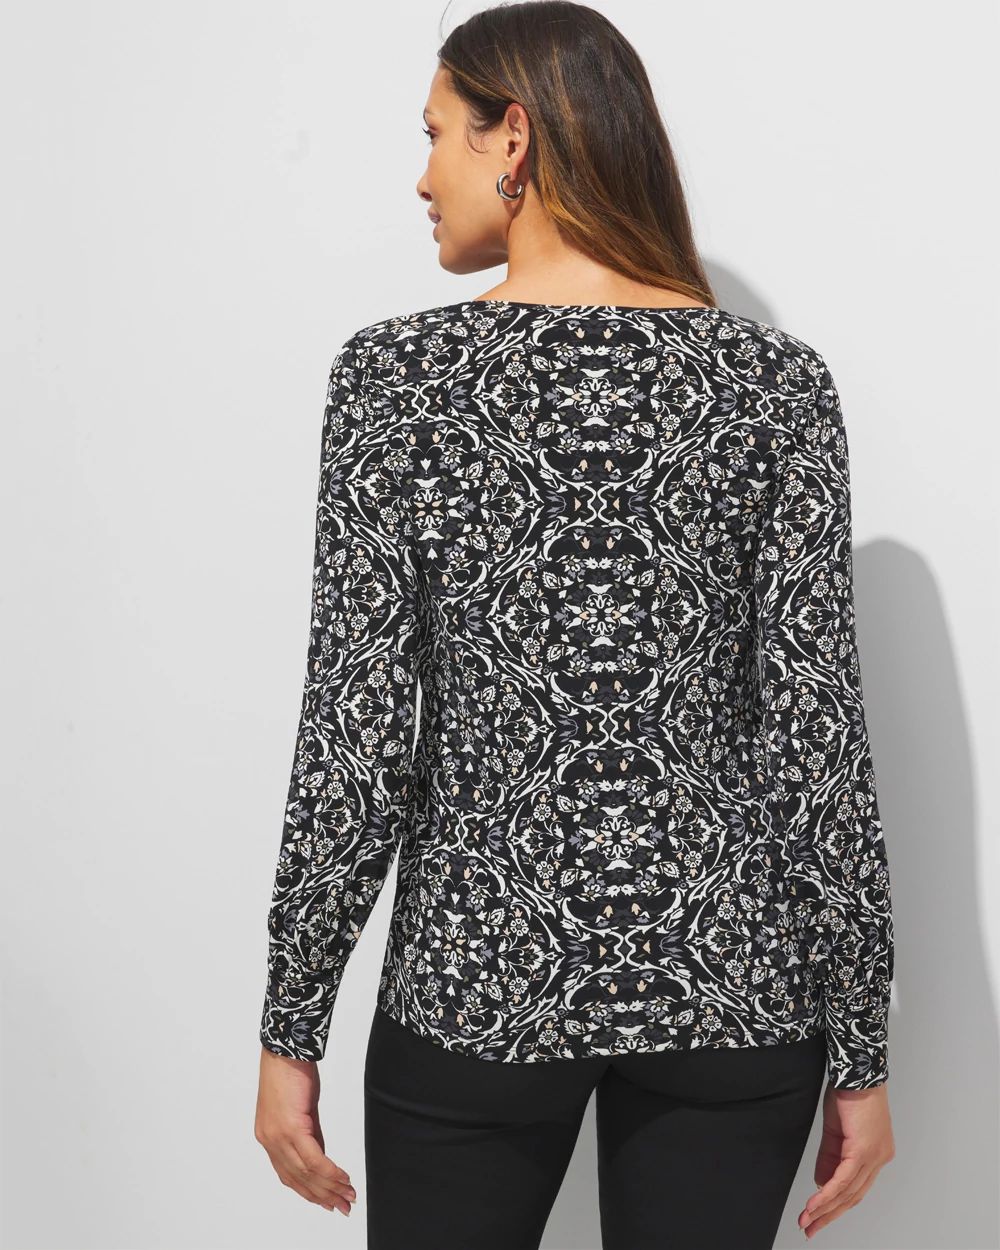 Outlet WHBM Notch Neck Top